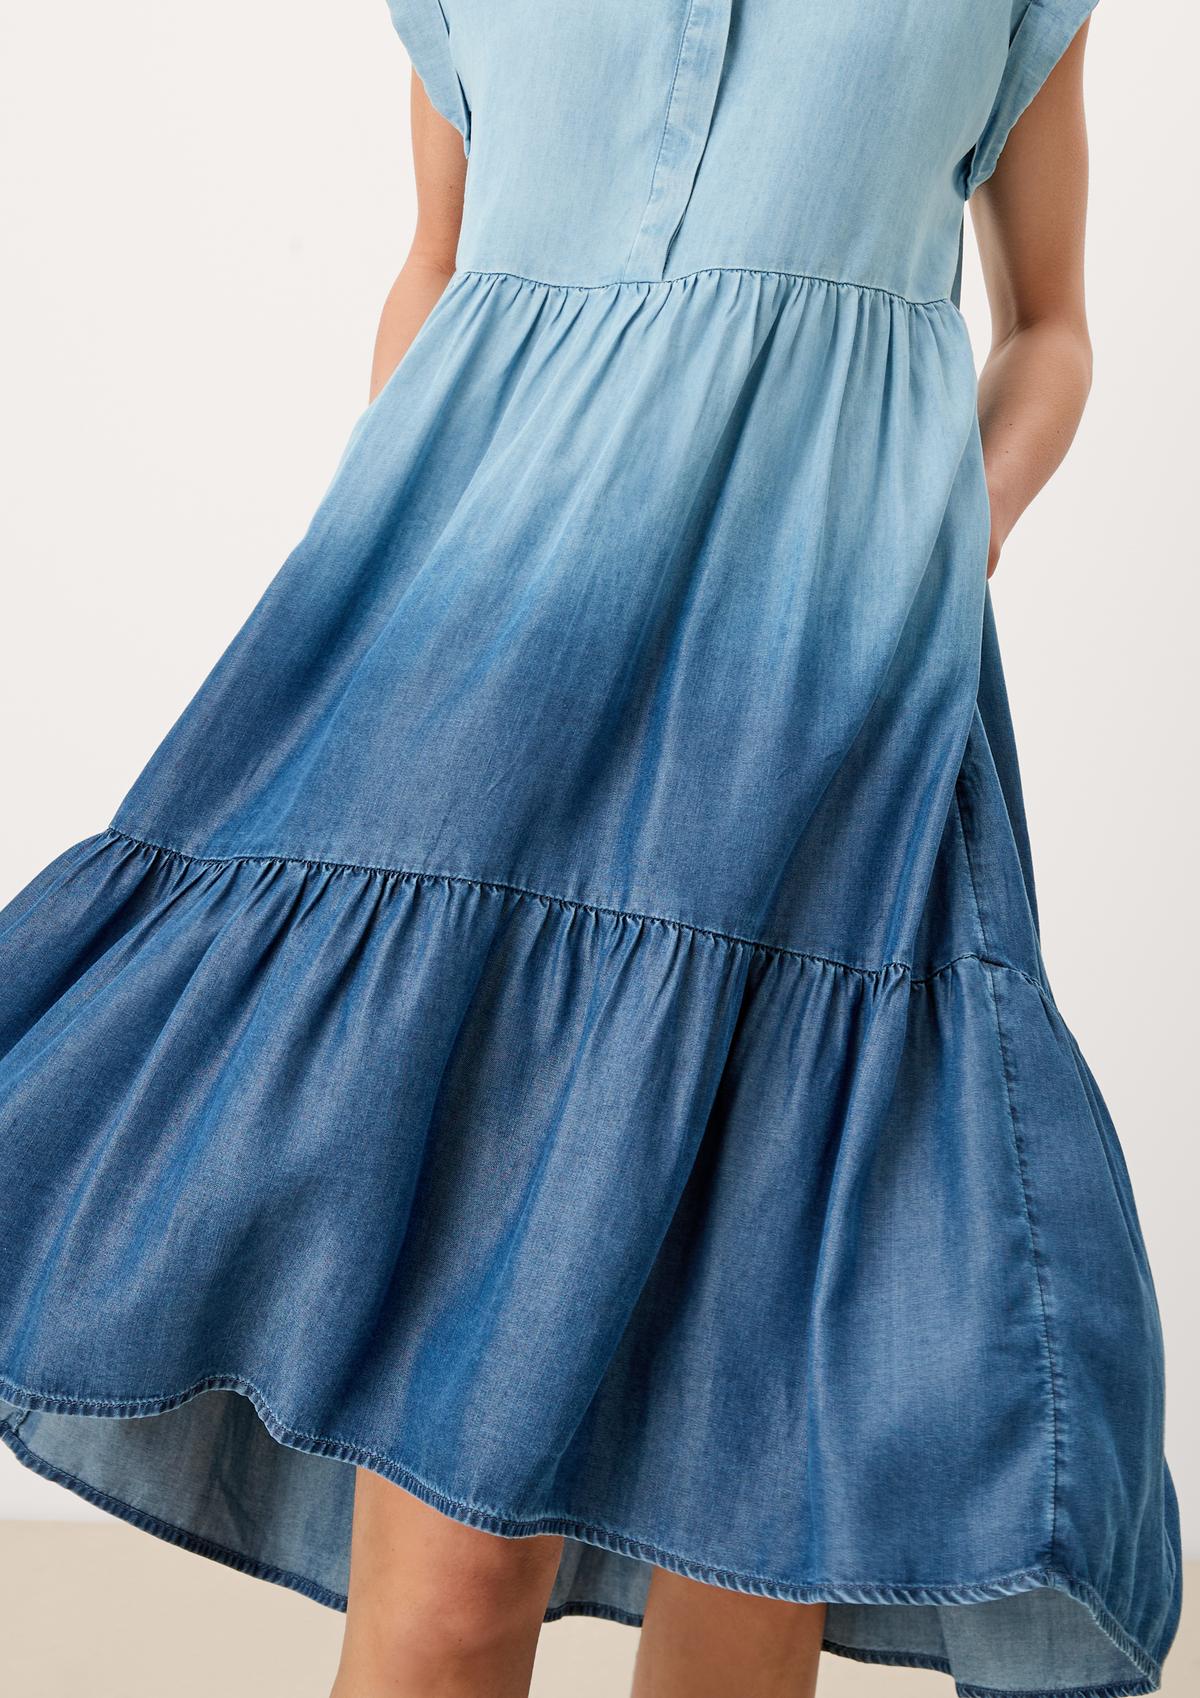 s.Oliver Tiered dress in a denim look